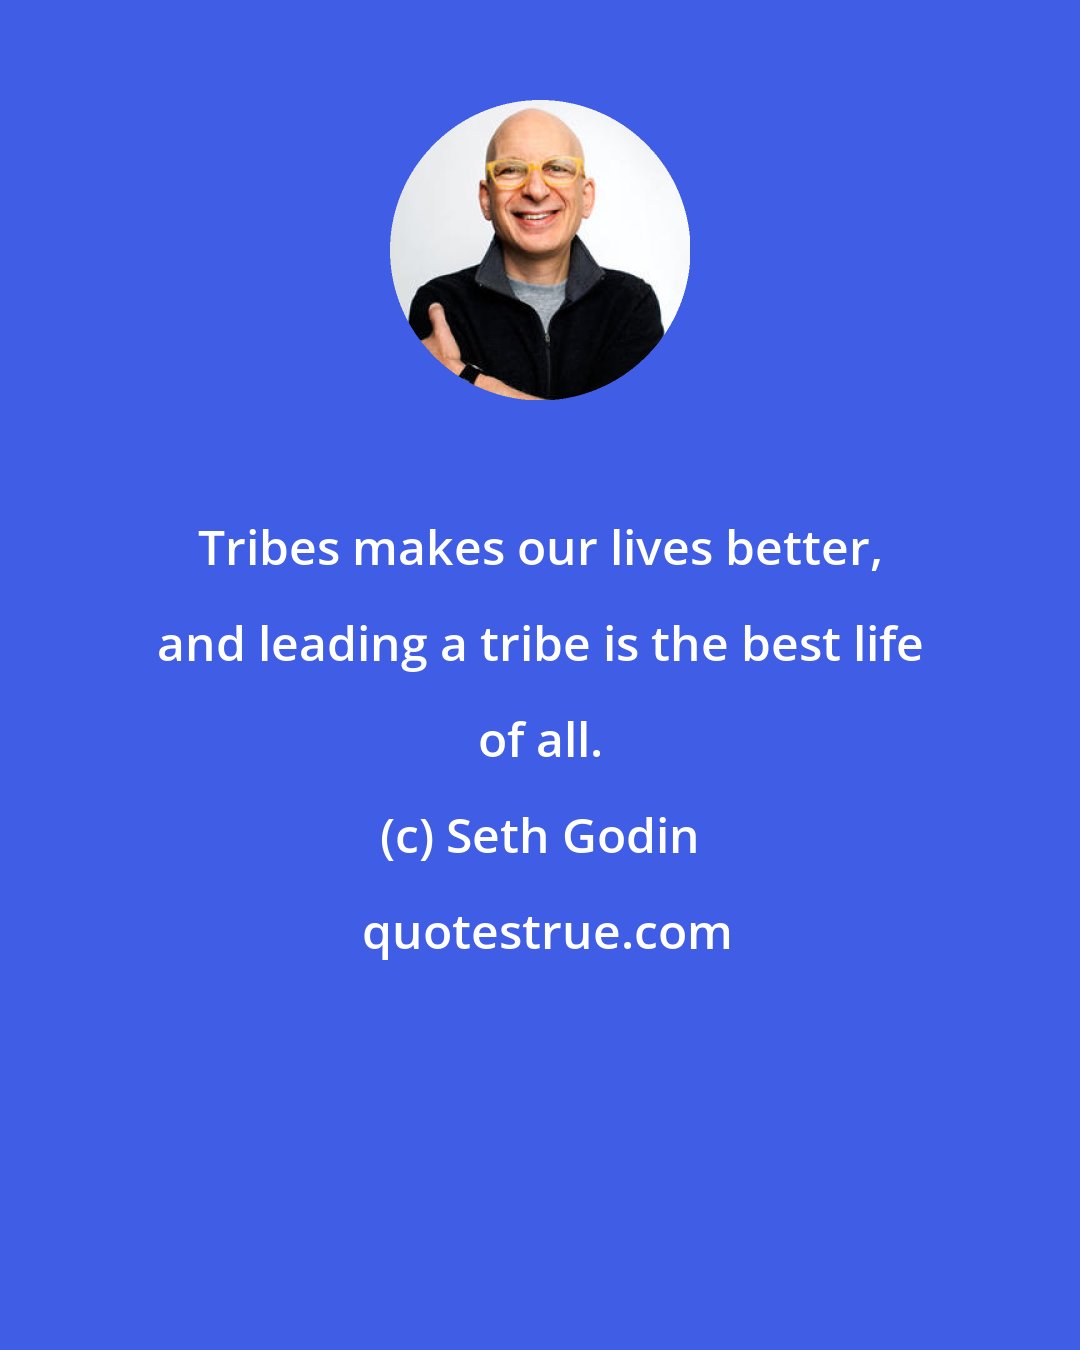 Seth Godin: Tribes makes our lives better, and leading a tribe is the best life of all.